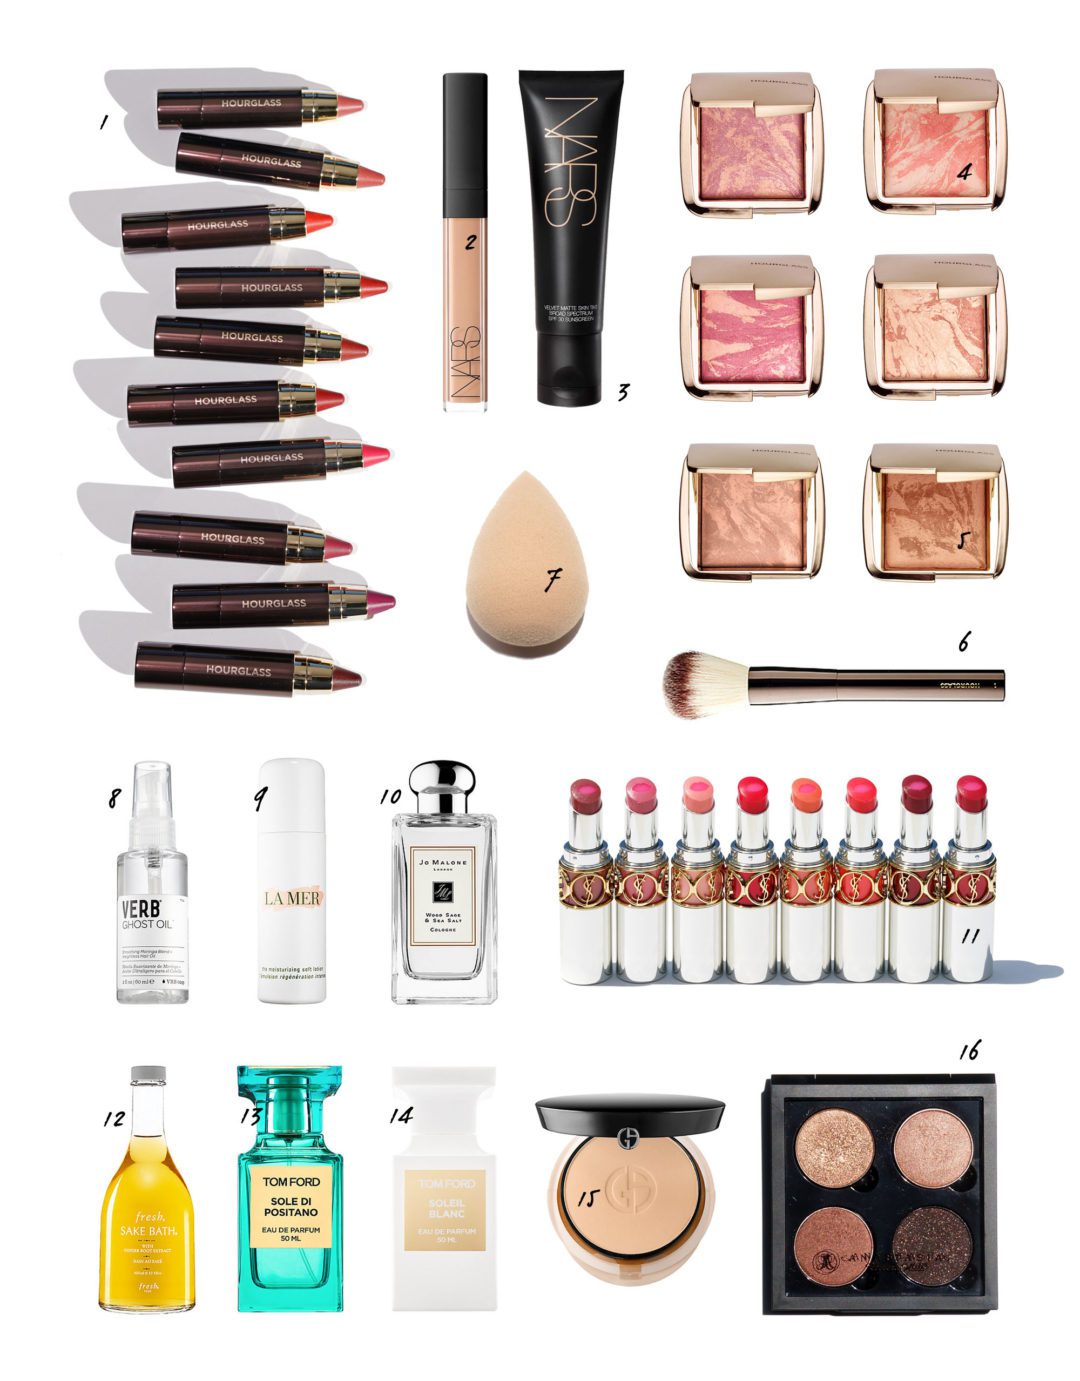 Sephora Beauty Insider Sale Event Details and Recommendations - The ...